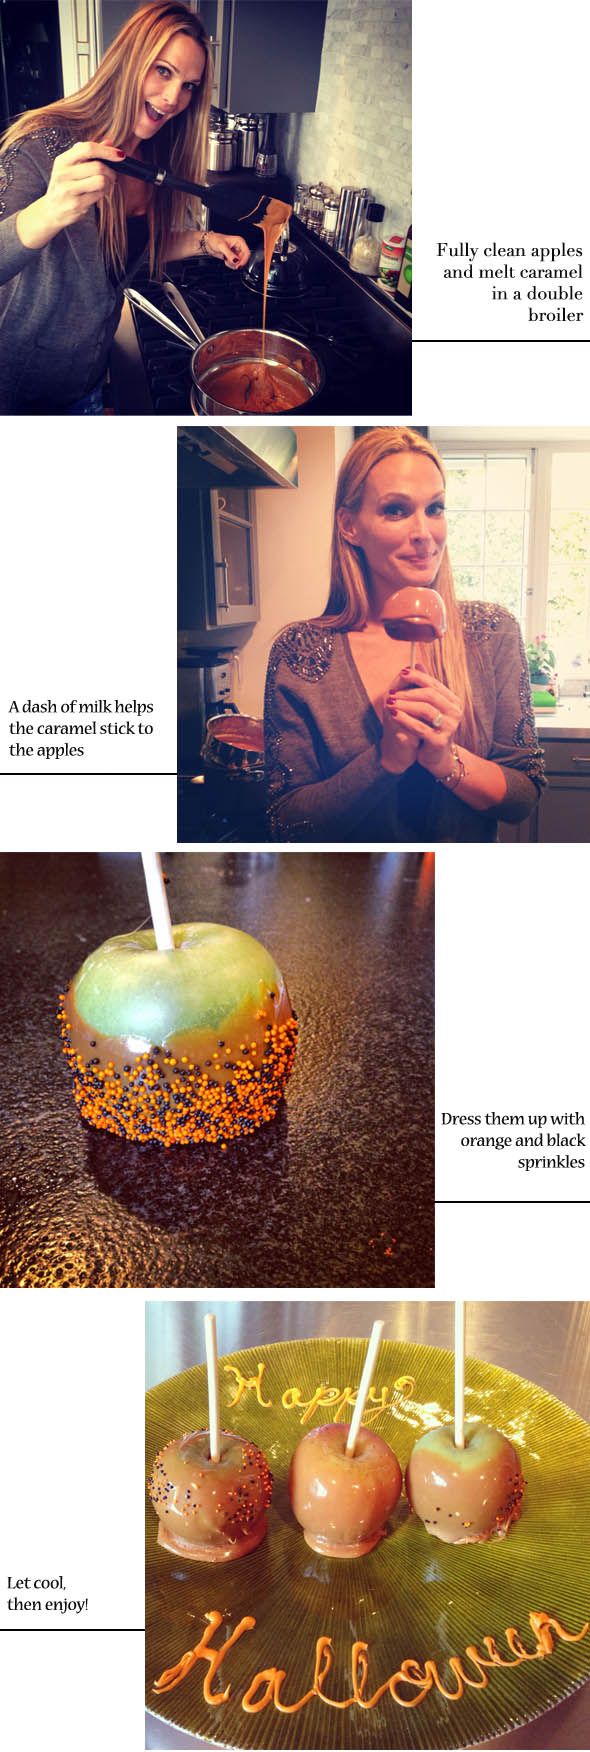 Molly Sims Caramel Apples How To Recipe